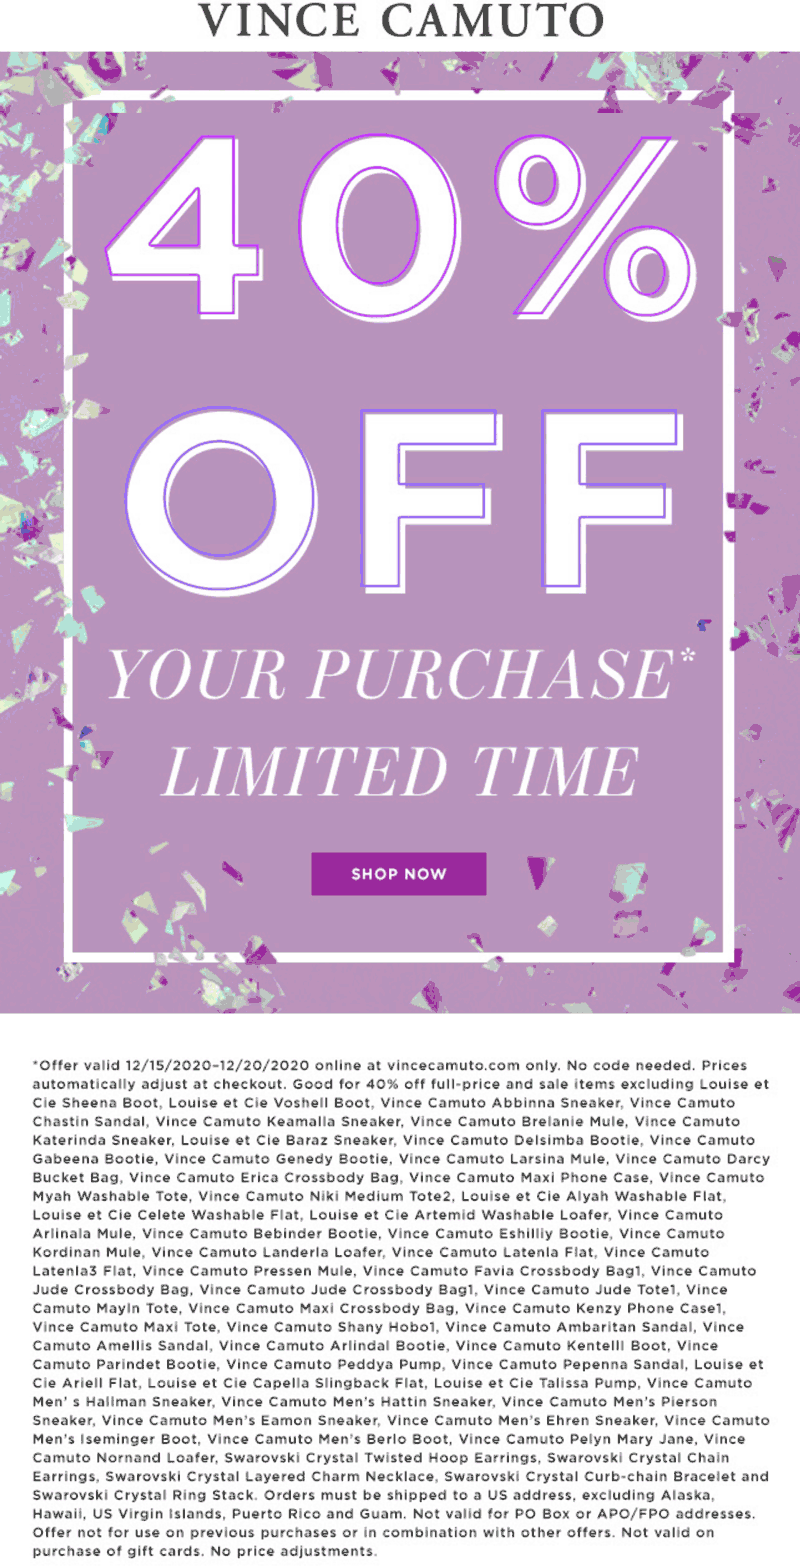 Vince Camuto stores Coupon  Extra 40% off at Vince Camuto #vincecamuto 